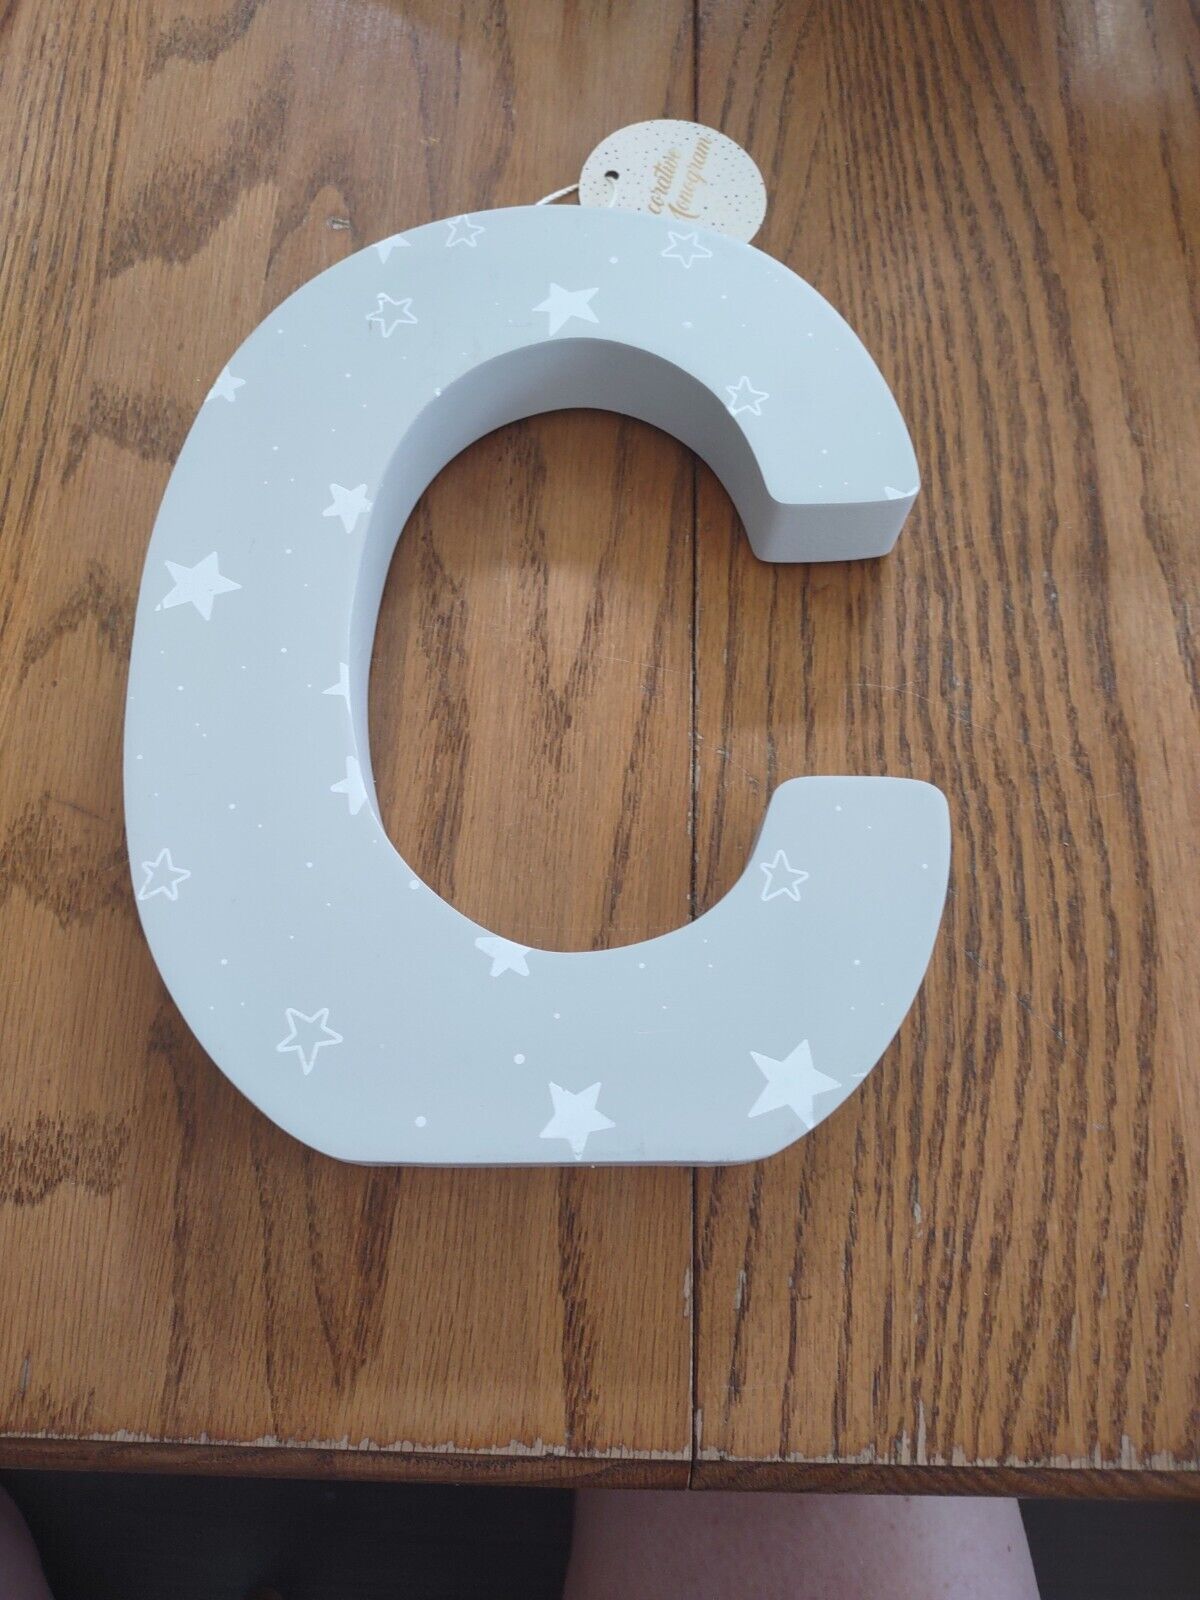 Primary image for Pier 1 Letter "C" Wooden Wall Art